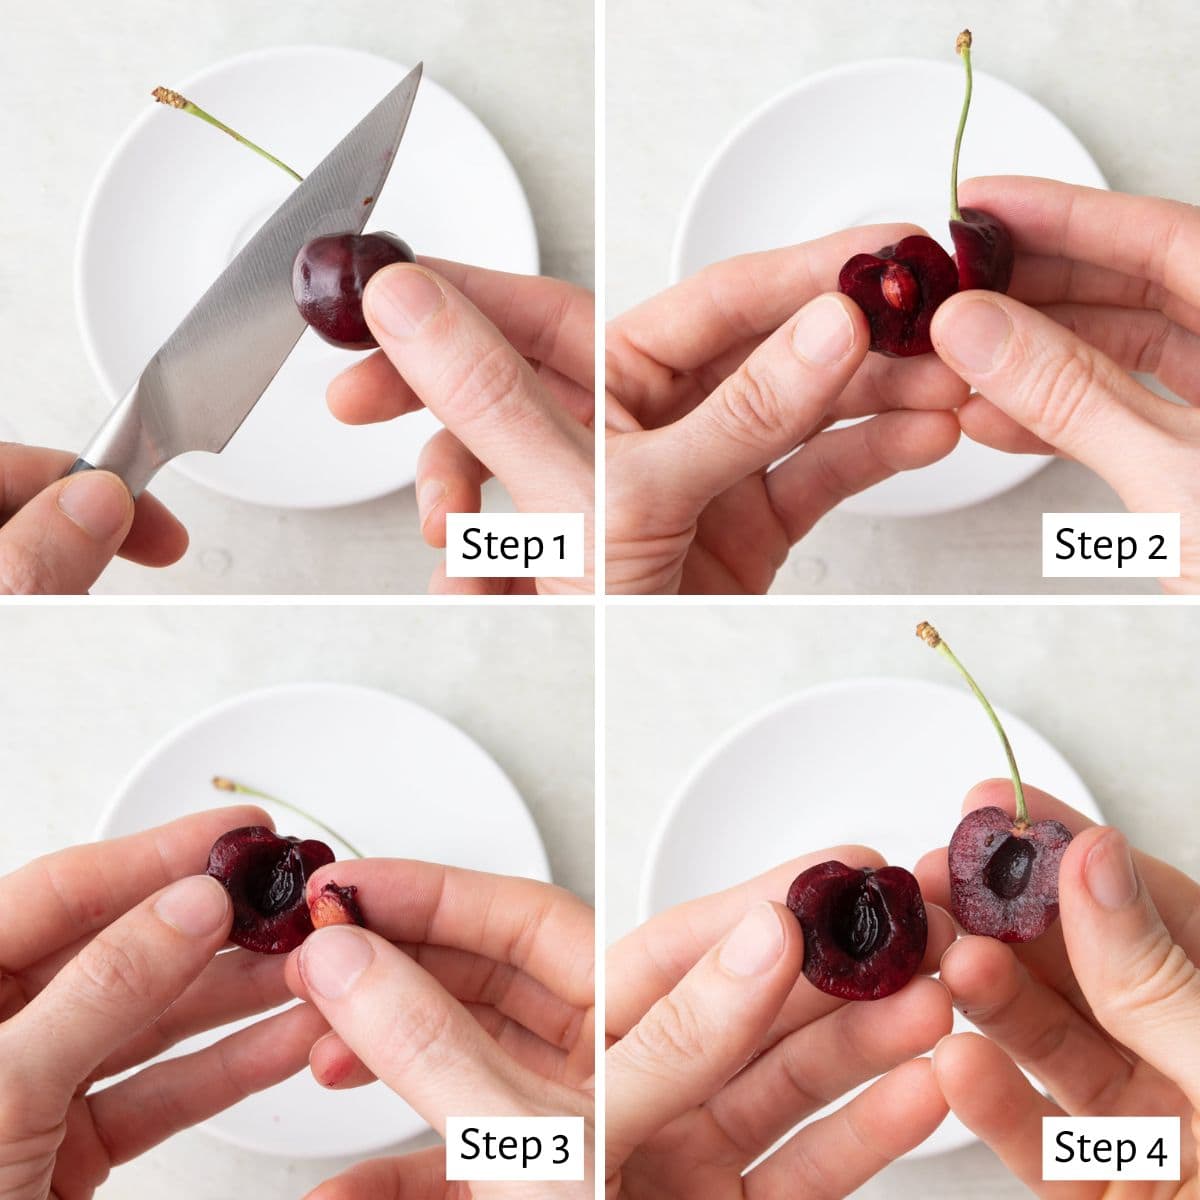 4-image collage of slice and twist method: 1 - Hand holding a cherry with a paring knife cutting around it lengthwise; 2 - Twisting the two sides; 3 - Fingers removing pit; 4 - Fingers hold cherry halved without pit.